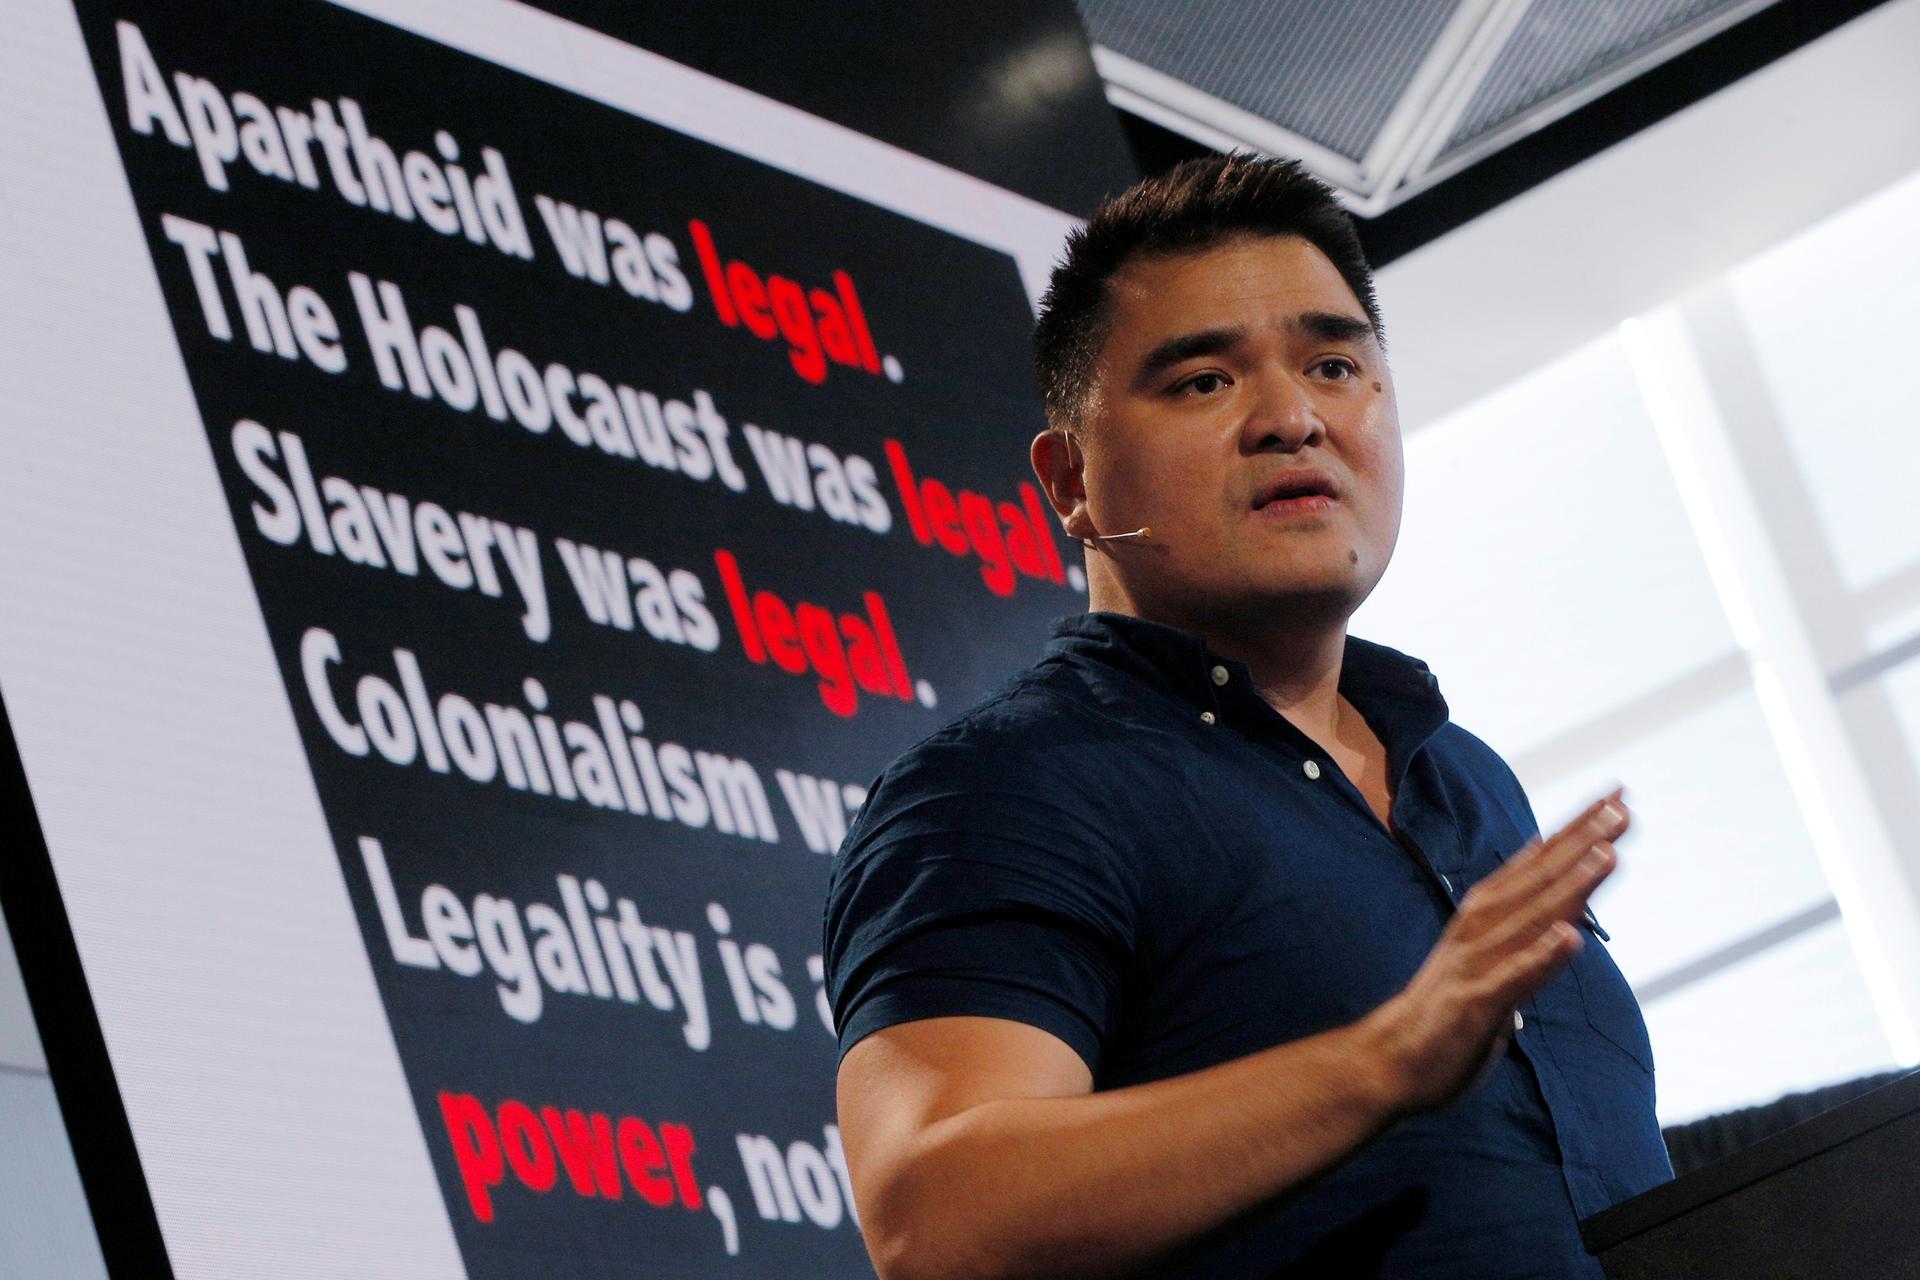 Jose Antonio Vargas speaks in front of a black background with white lettering 